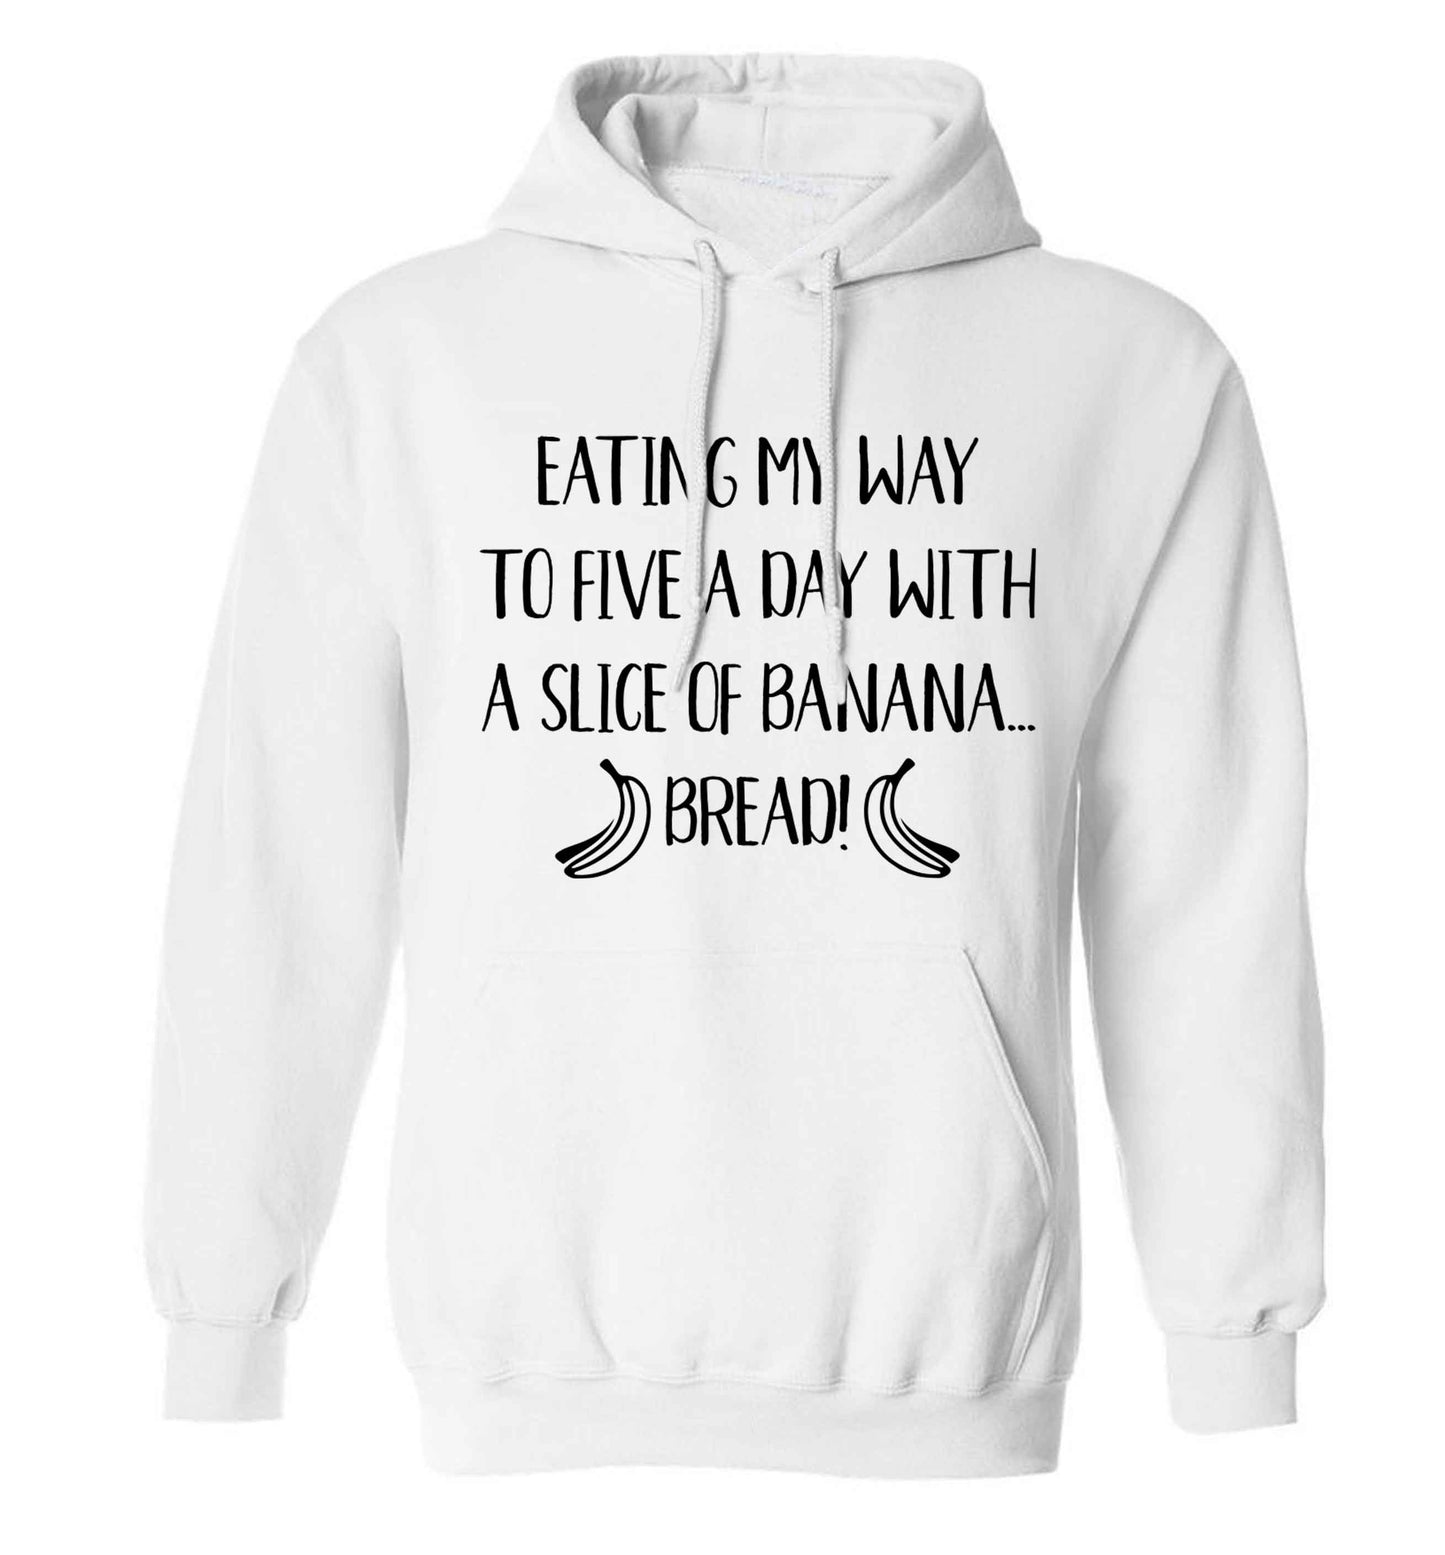 Eating my way to five a day with a slice of banana bread adults unisex white hoodie 2XL